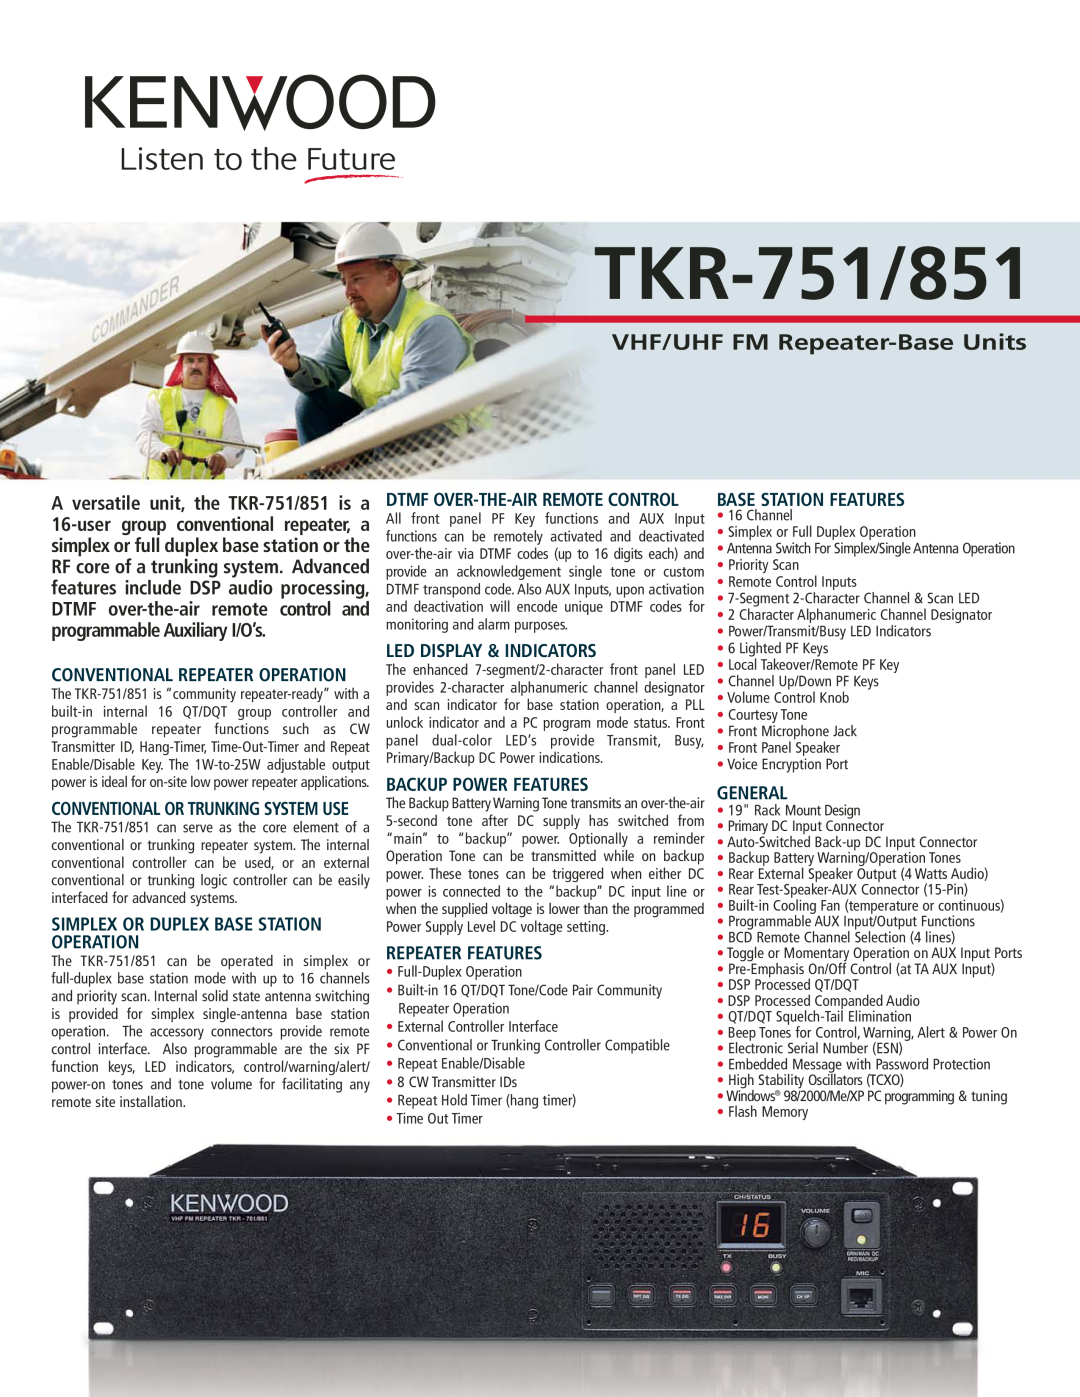 Kenwood manual TKR-751/851, VHF/UHF FM Repeater-Base Units, Simplex Or Duplex Base Station Operation, Repeater Features 